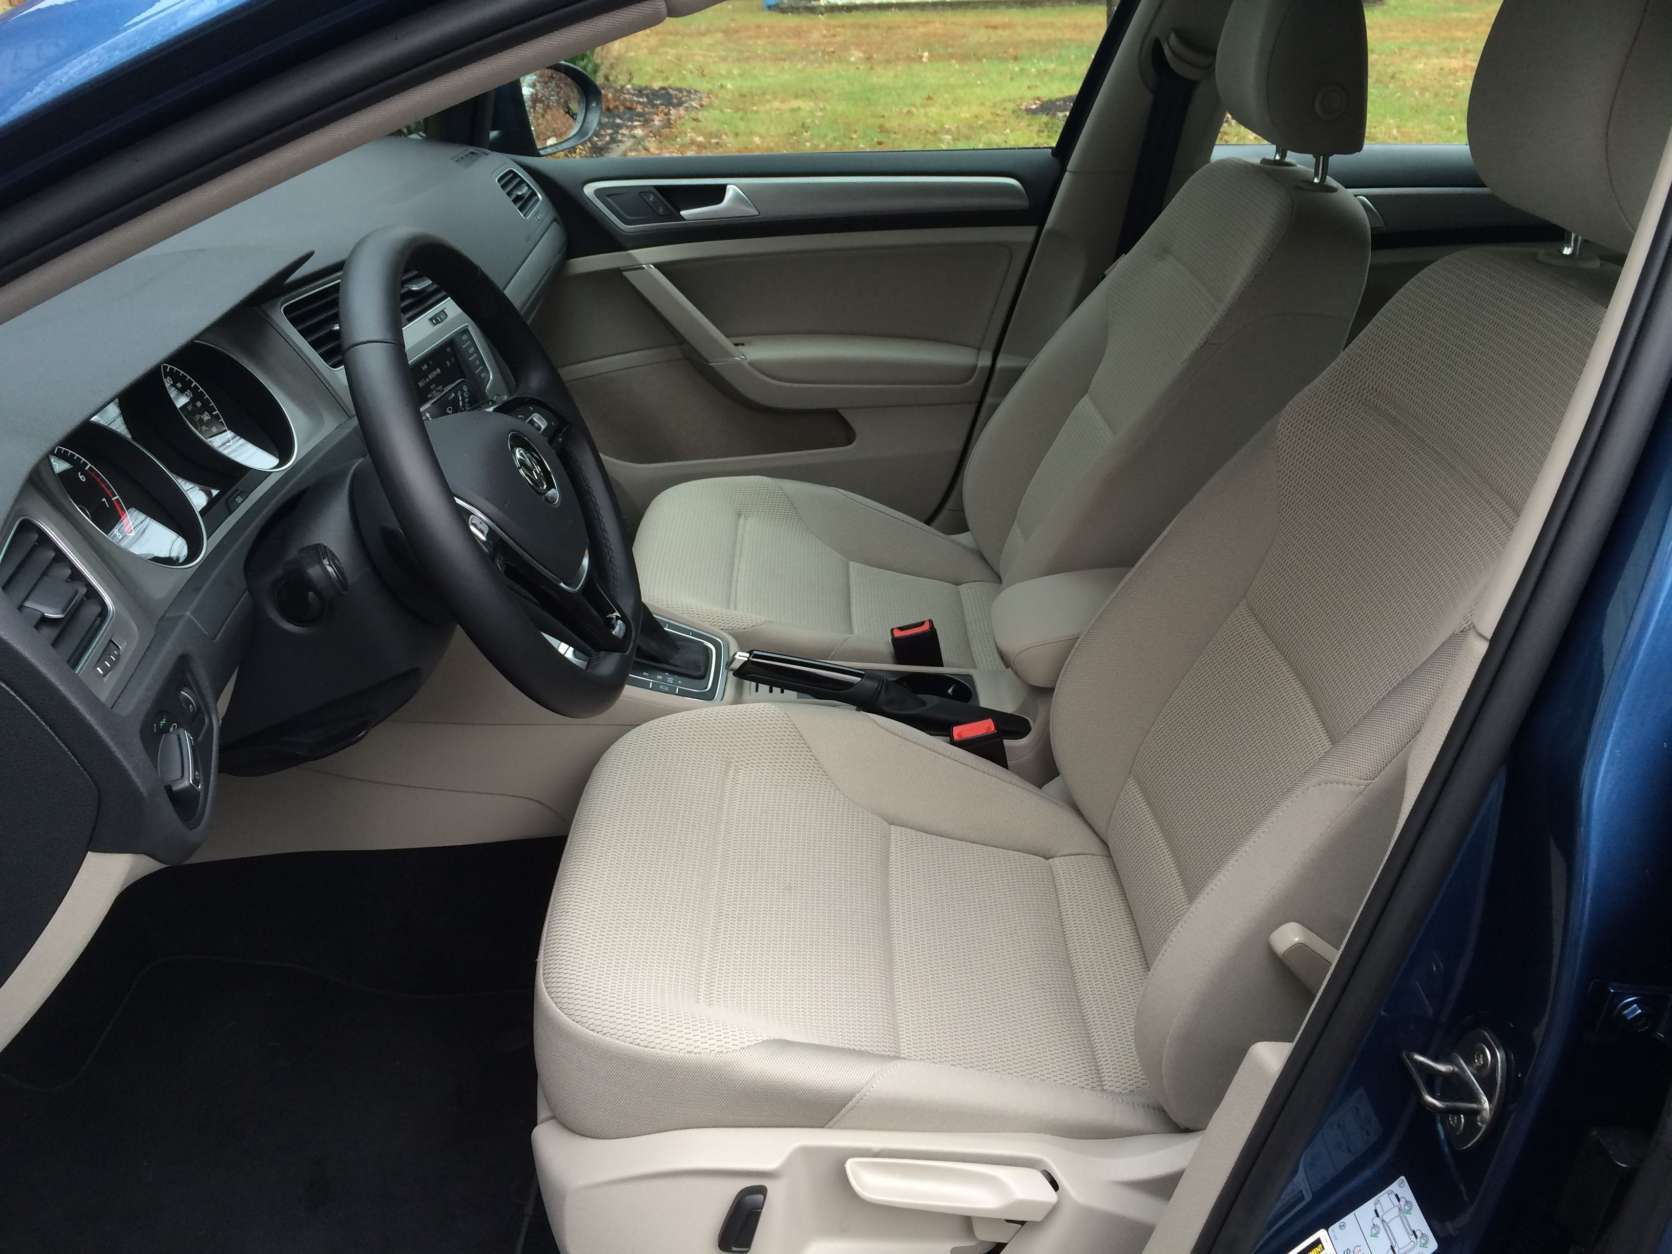 The big interior space in the Volkswagen Golf SportWagen is a big plus especially in a smaller package. (WTOP/Mike Parris)